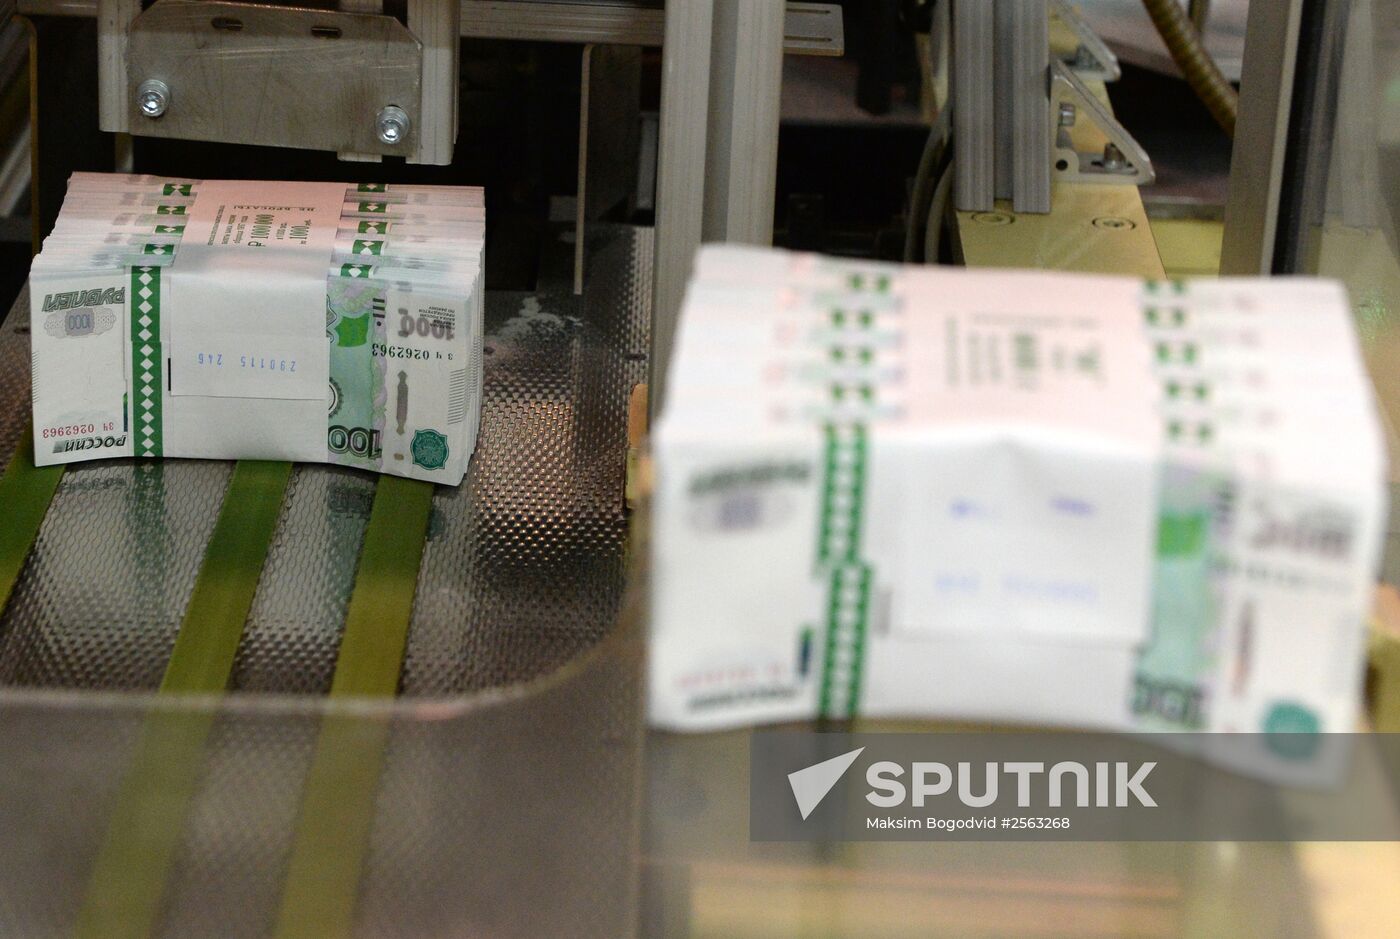 Banknotes printed at a printing factory of the Federal State Unitary Enterprise “Goznak” in Perm